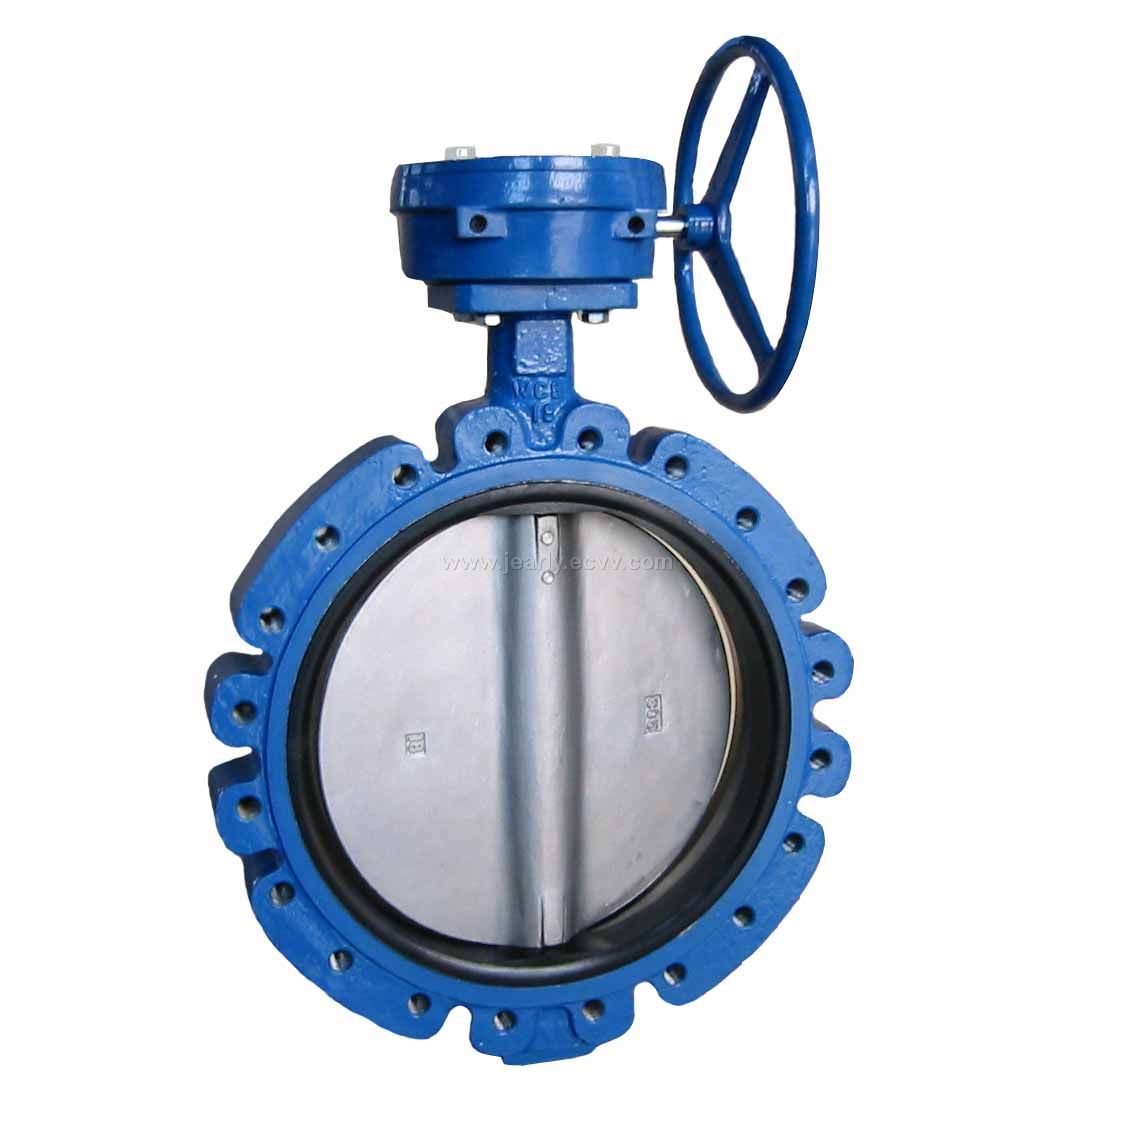 Wafer Lug Butterfly Valve Purchasing Souring Agent Purchasing Service Platform 4008